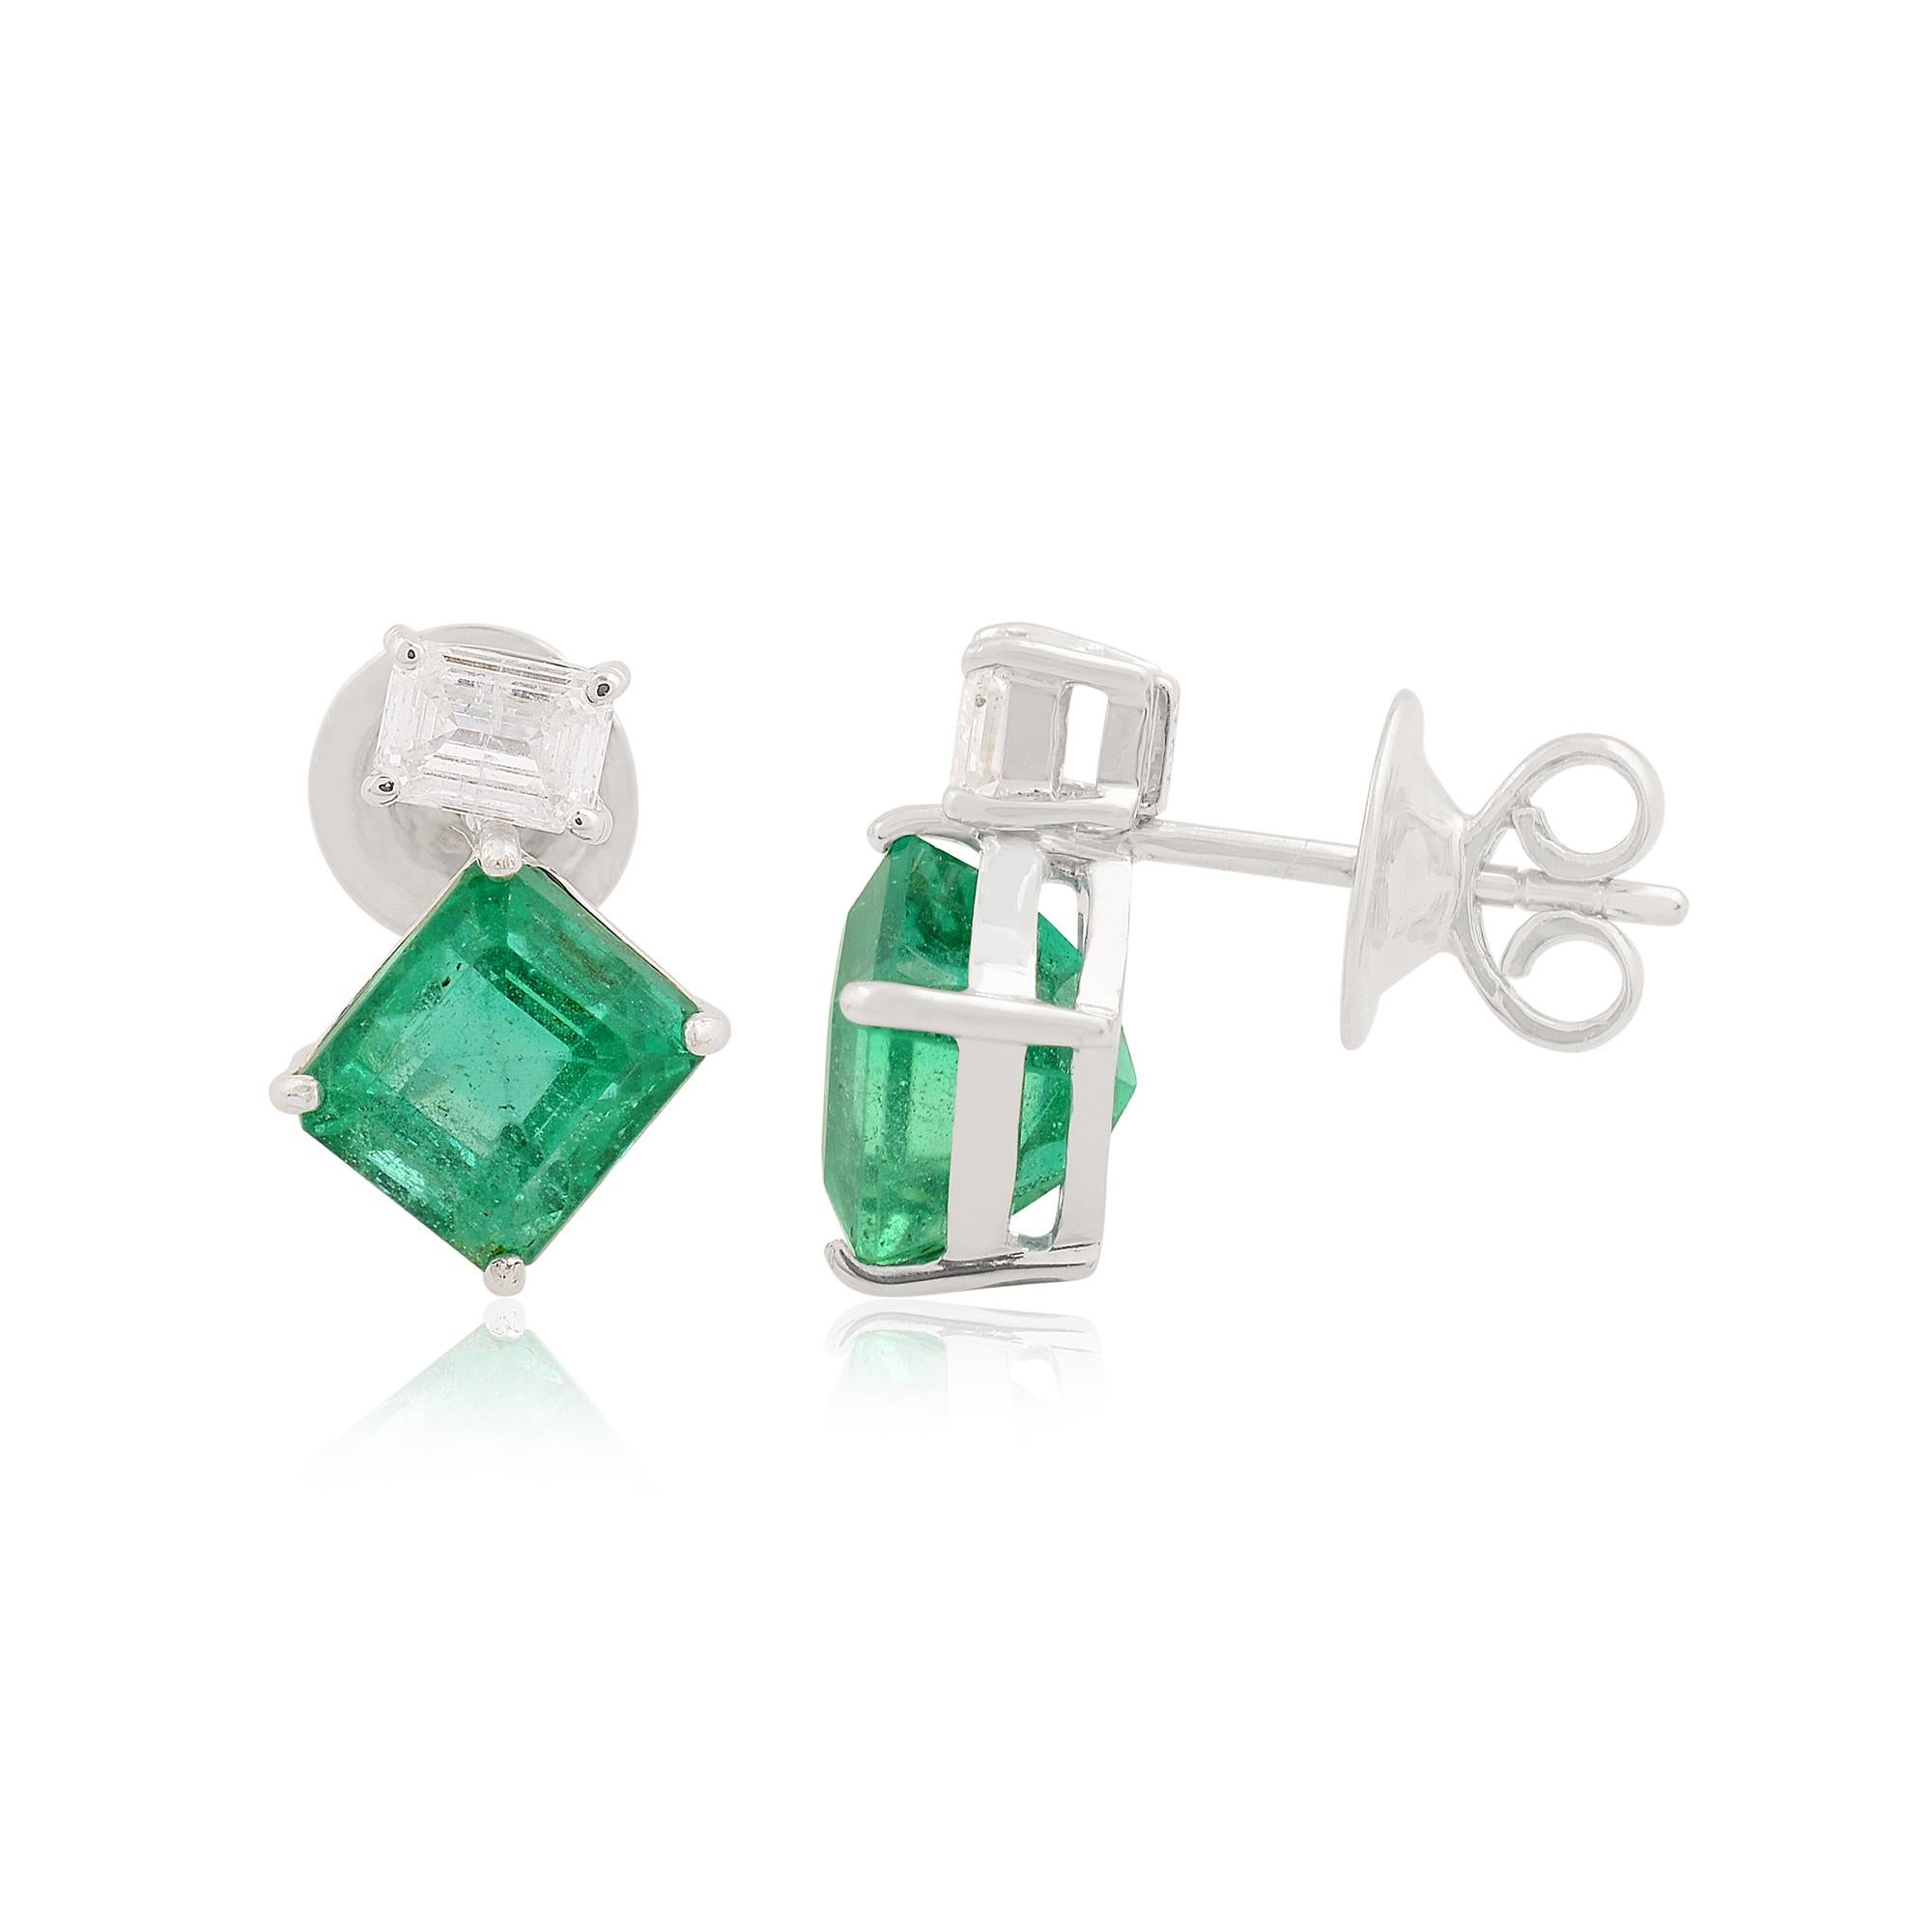 Natural Emerald Gemstone Stud Earrings Diamond Solid 14k White Gold Fine Jewelry

Details

Stone :- Diamond / Emerald
Stone Shape :- Emerald Cut / Octagon
Treatment :- Natural
Making :- Handmade
Item Code :- SEE-1272
Gross Weight :- 2.68 gm
14k